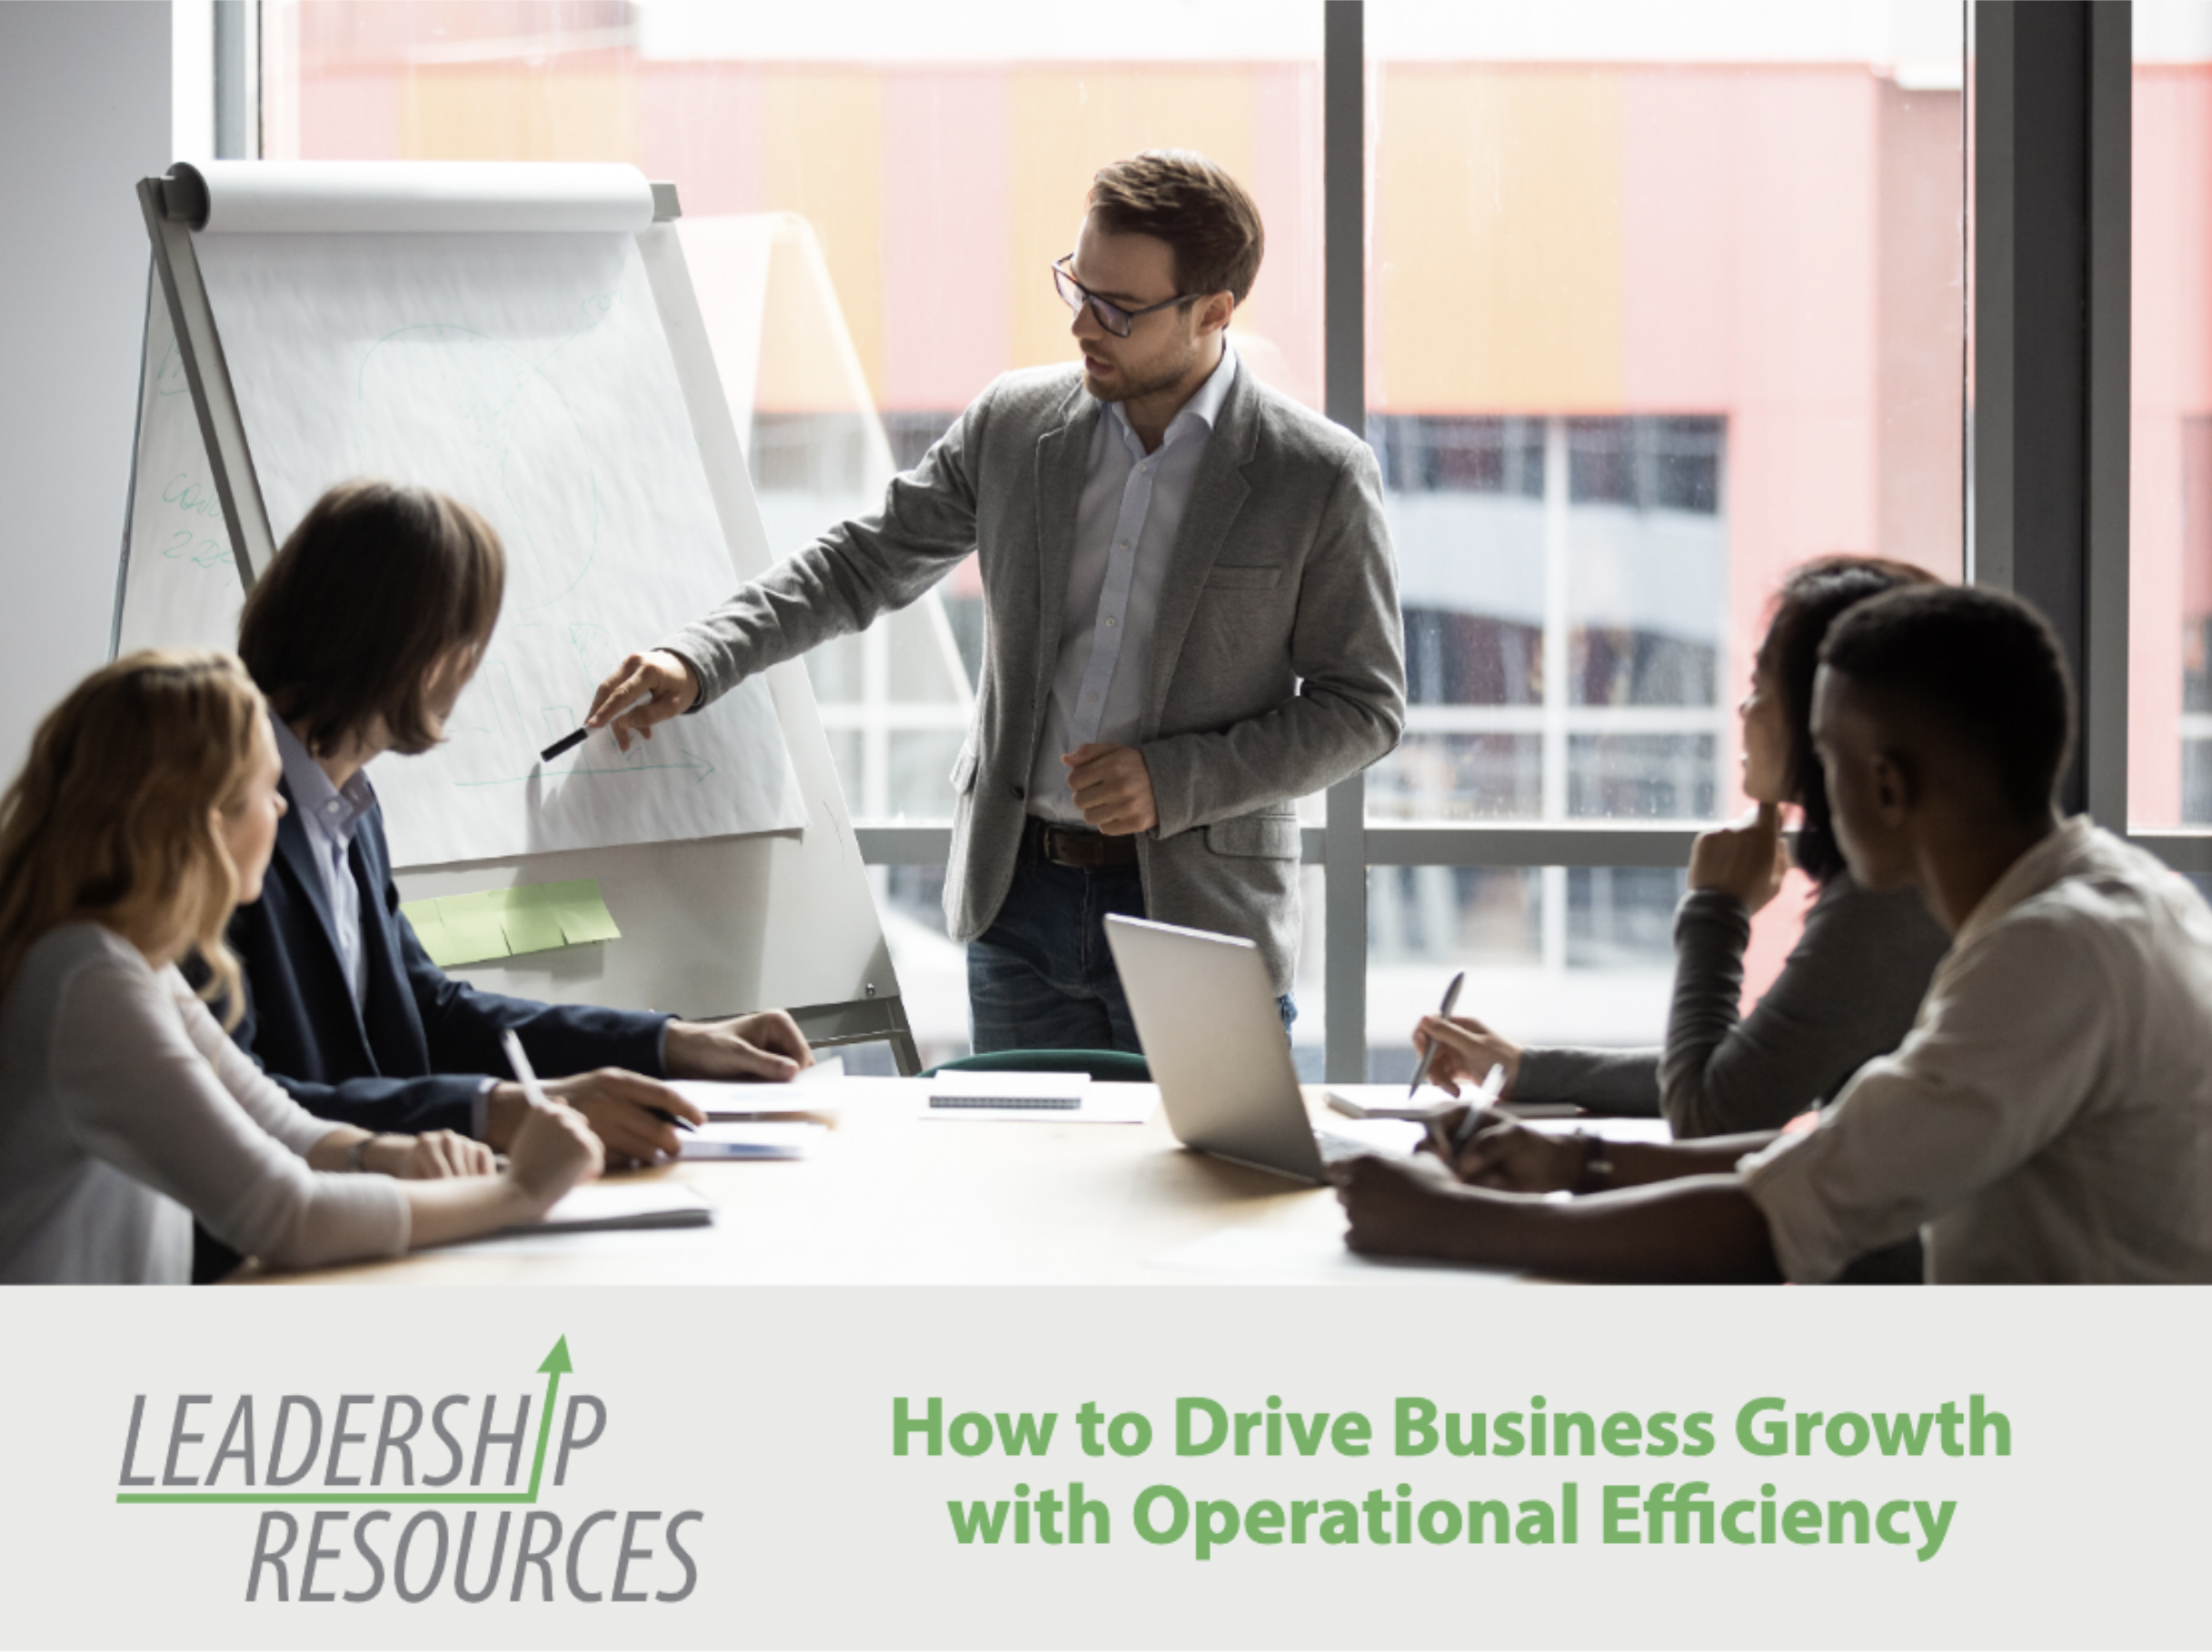 How to Drive Business Growth with Operational Efficiency